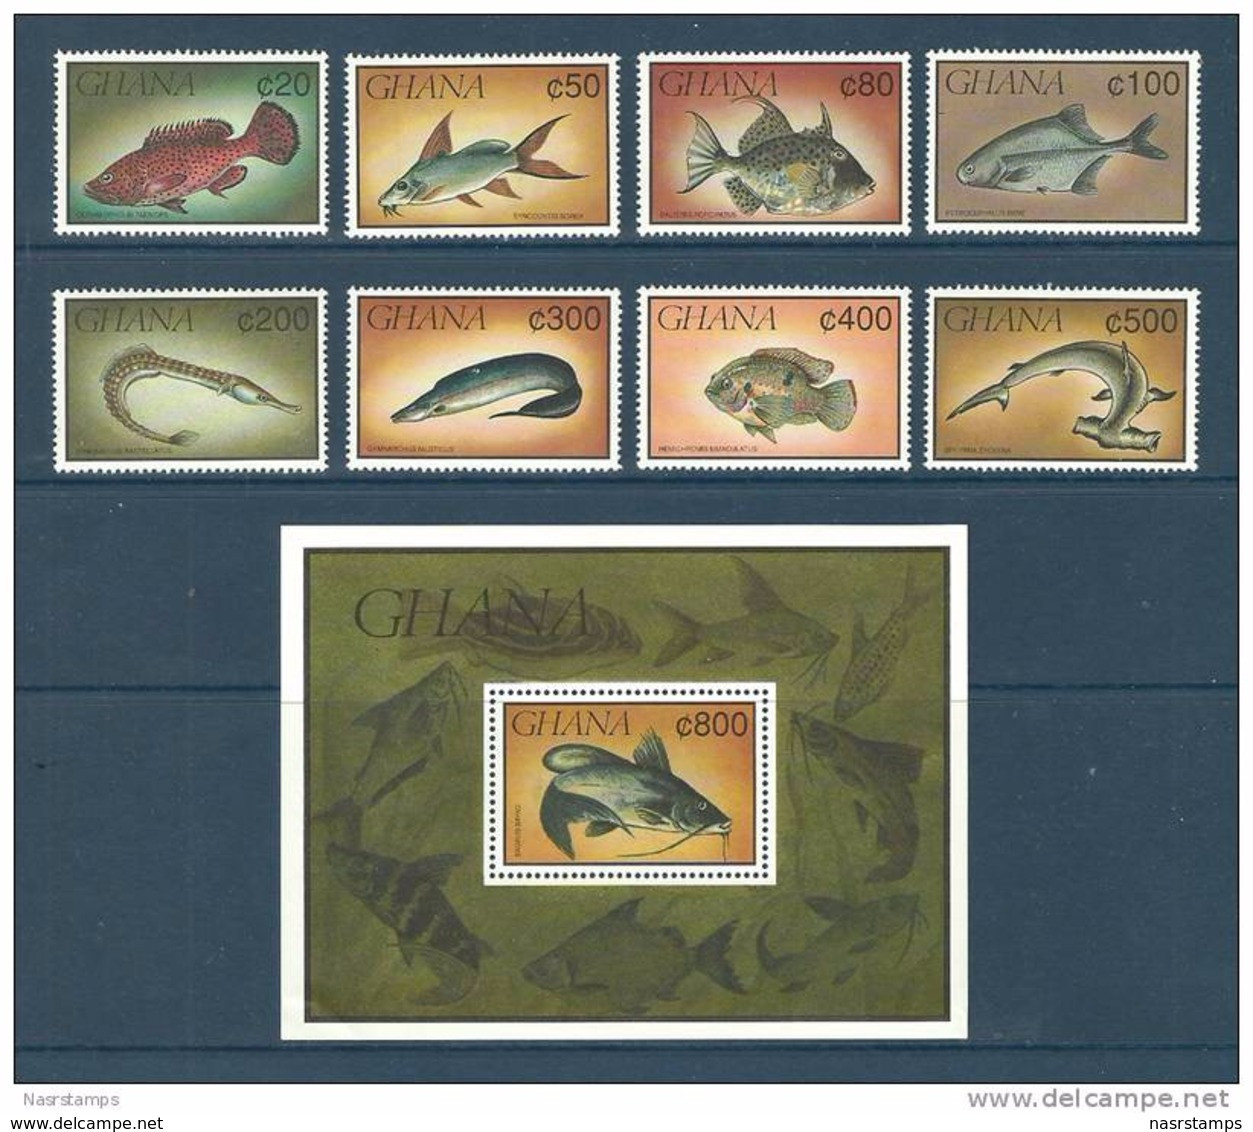 Ghana - 1991 - ( Fish - Fishes From Ghana ) Complete Set With S/S - MNH (**) - Ghana (1957-...)